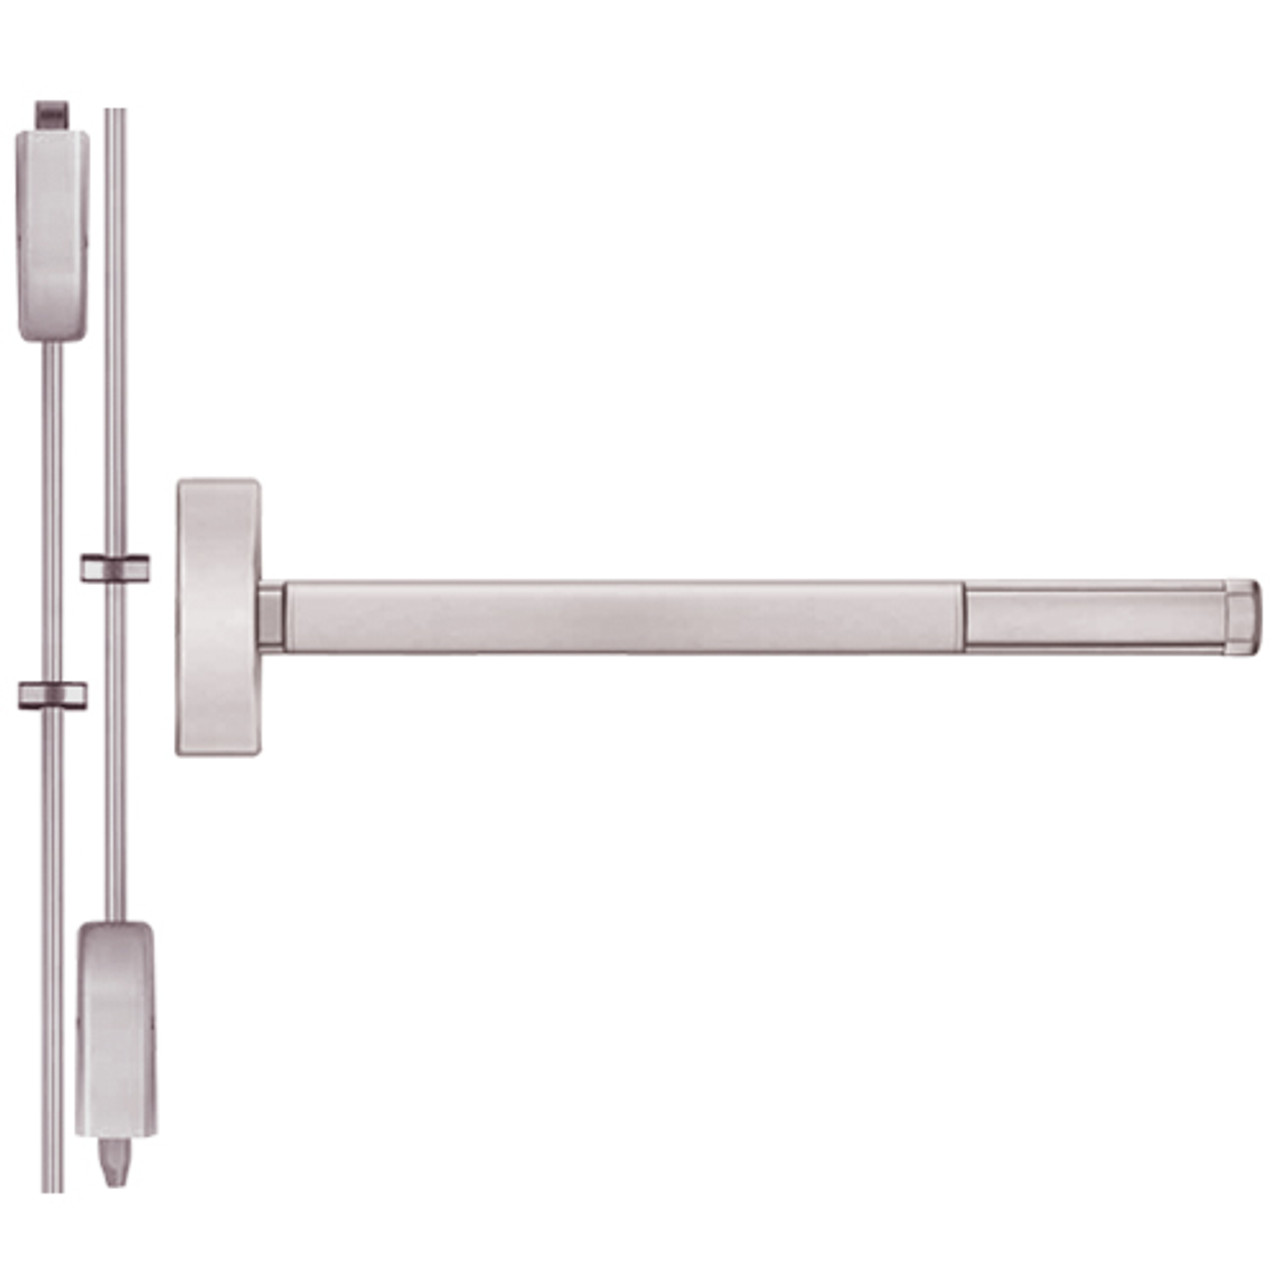 TSFL2203LBR-628-48 PHI 2200 Series Apex Surface Vertical Rod Device with Touchbar Monitoring Switch Prepped for Key Retracts Latchbolt in Satin Aluminum Finish